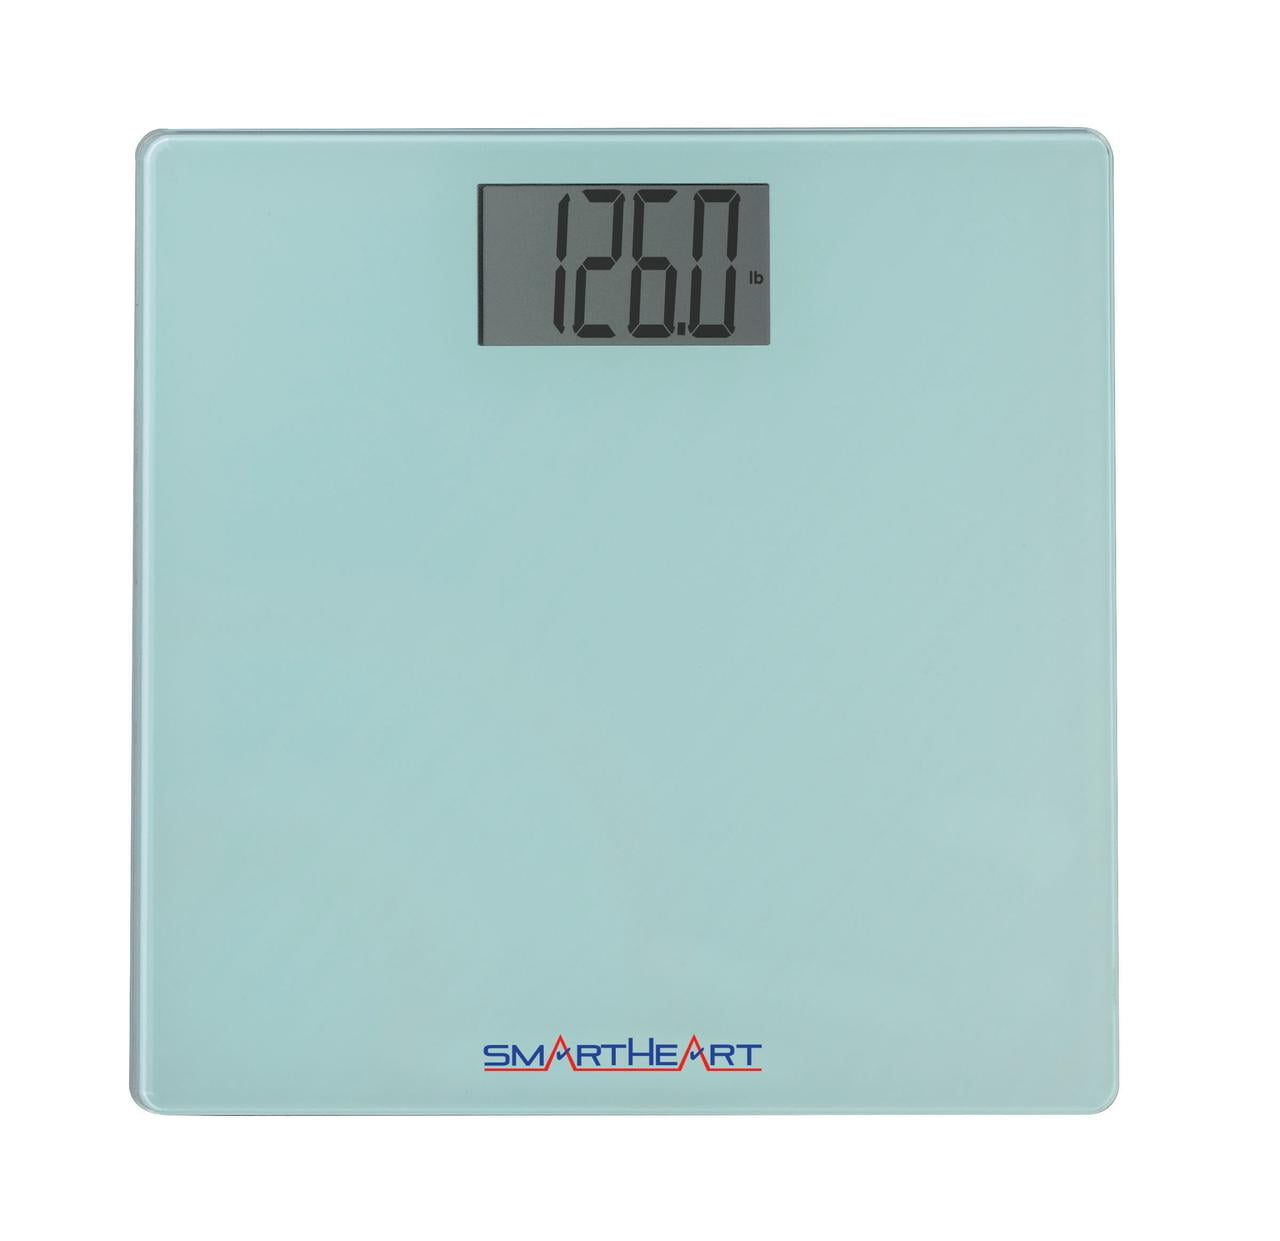 Picture of Veridian Healthcare 19-101 Digital Weight Scale